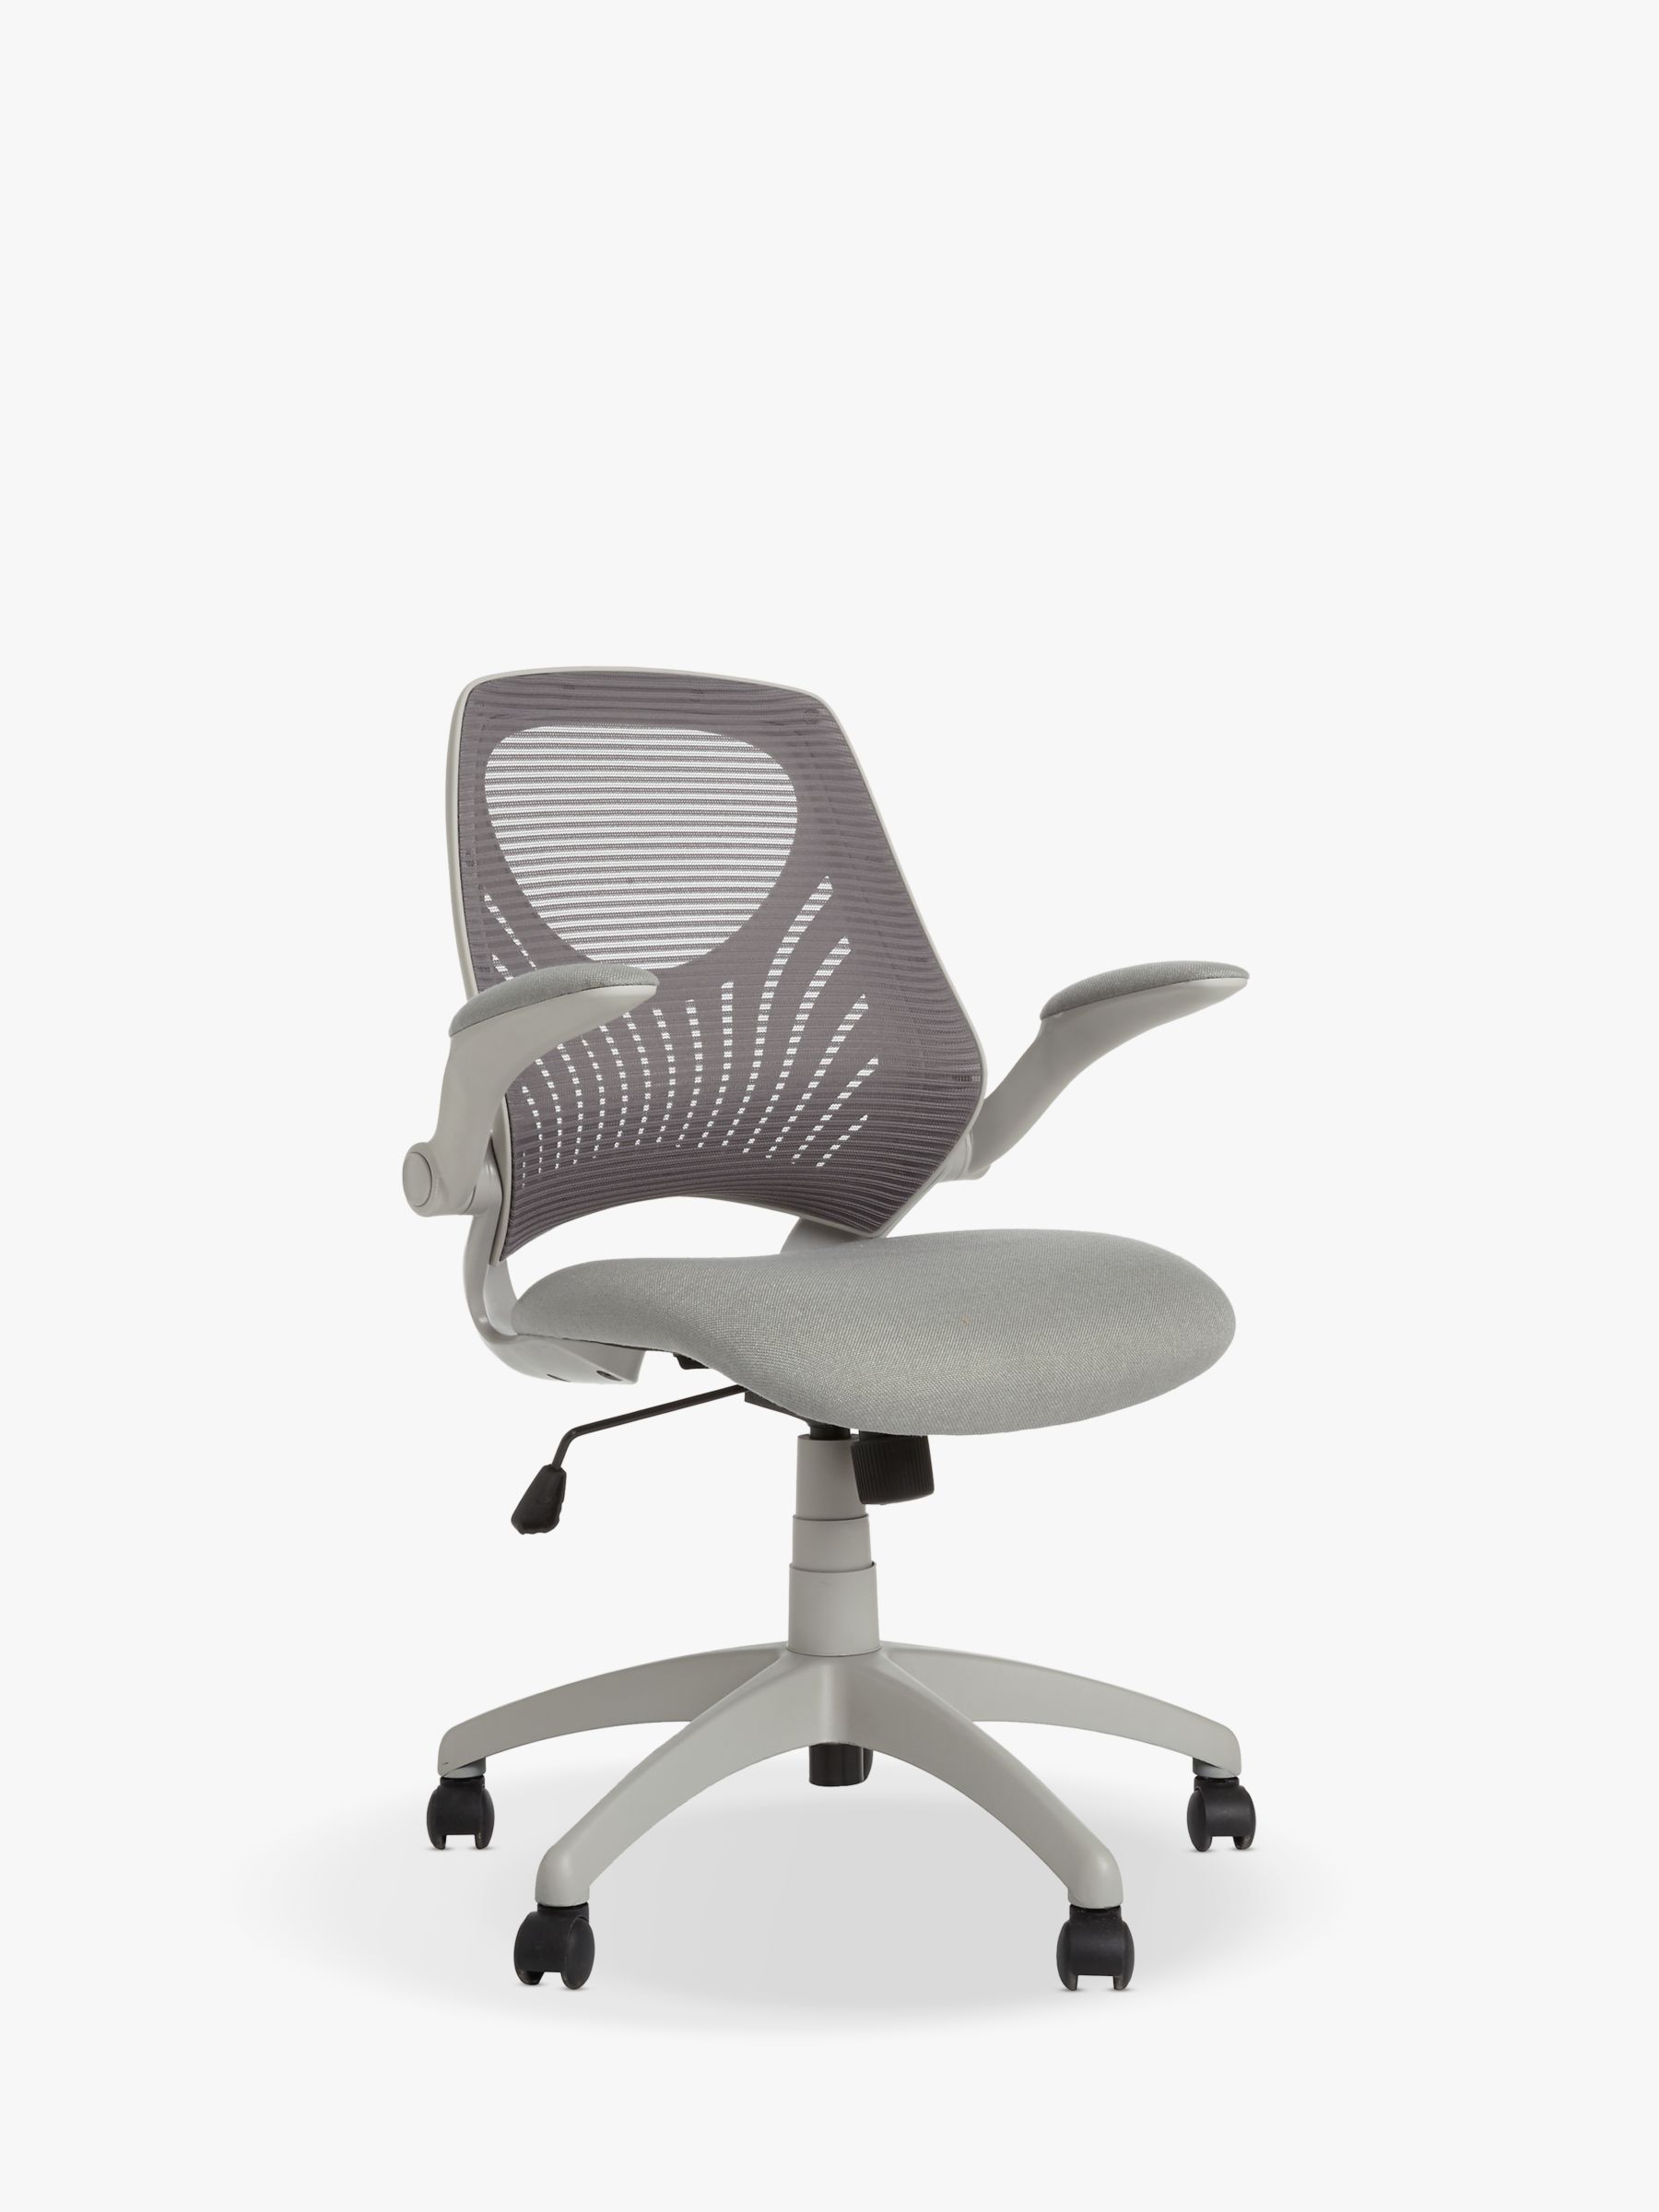 Photo of John lewis anyday hinton office chair